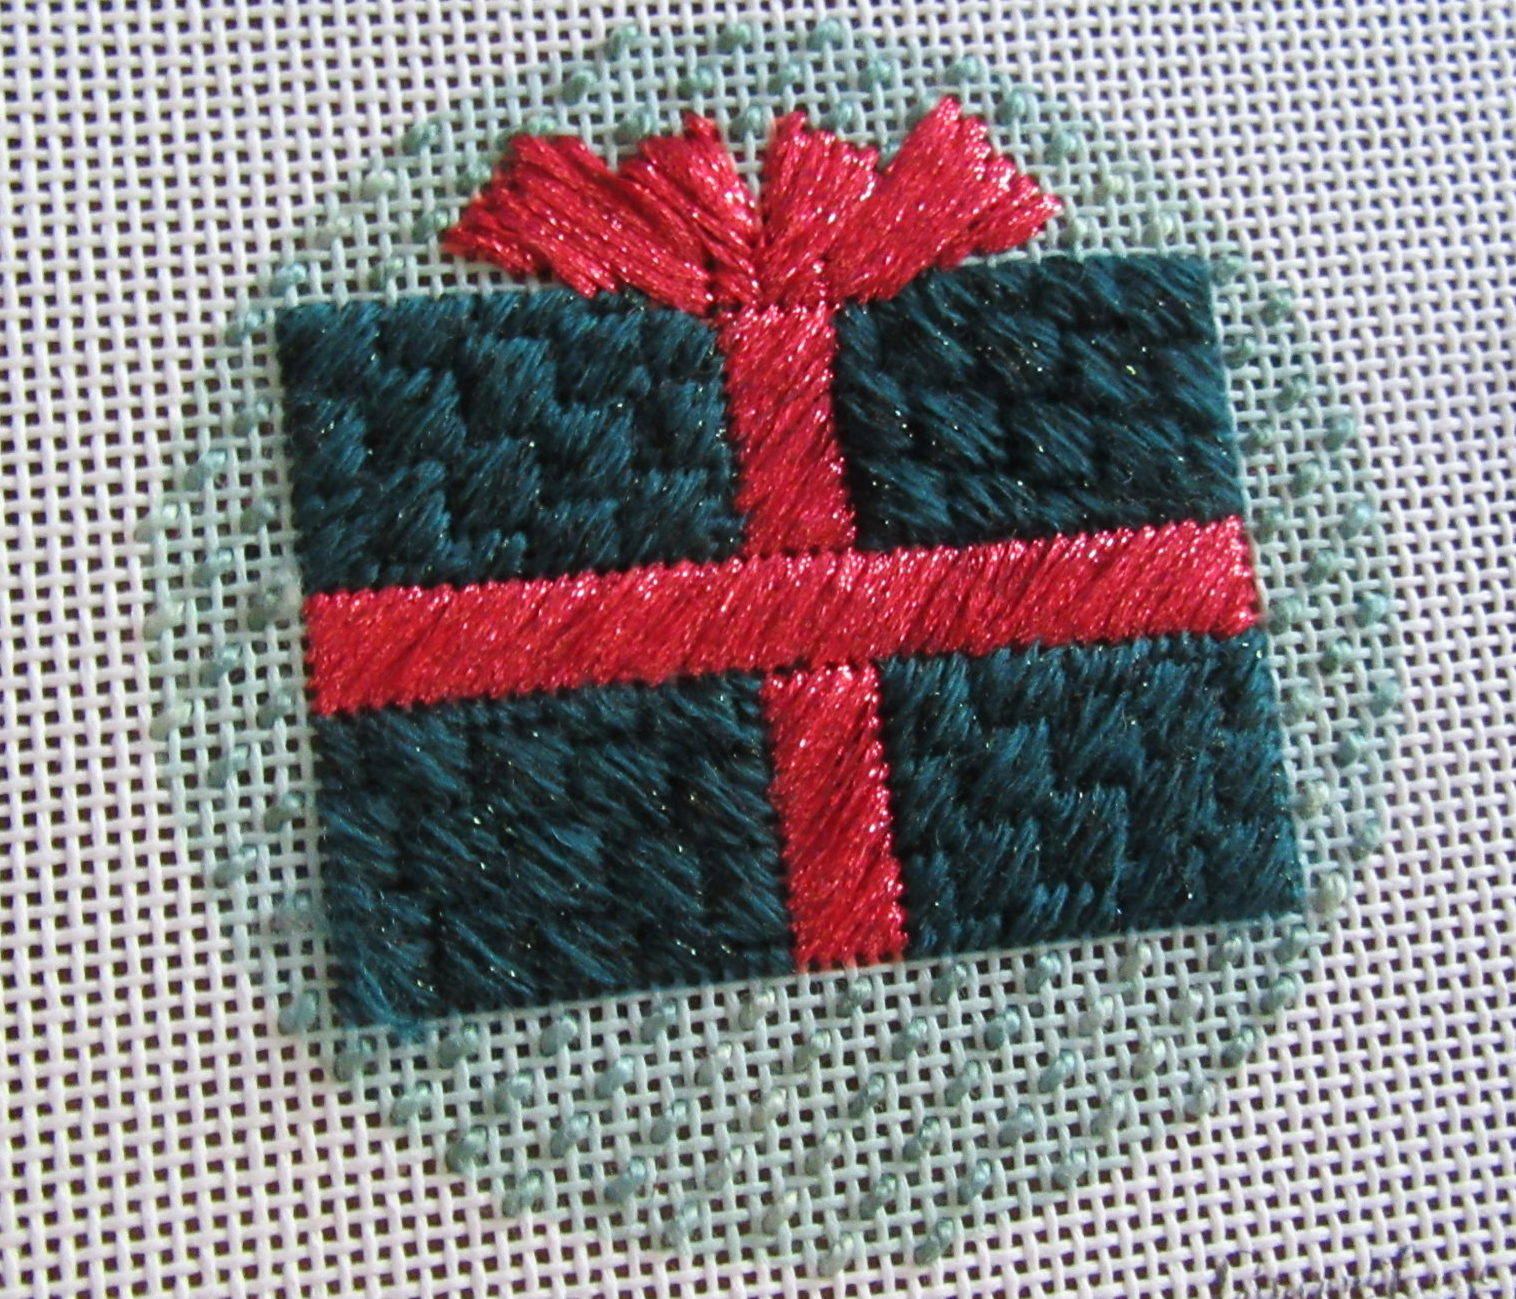 Needle In A Haystack Newsletter - Stitching Frames